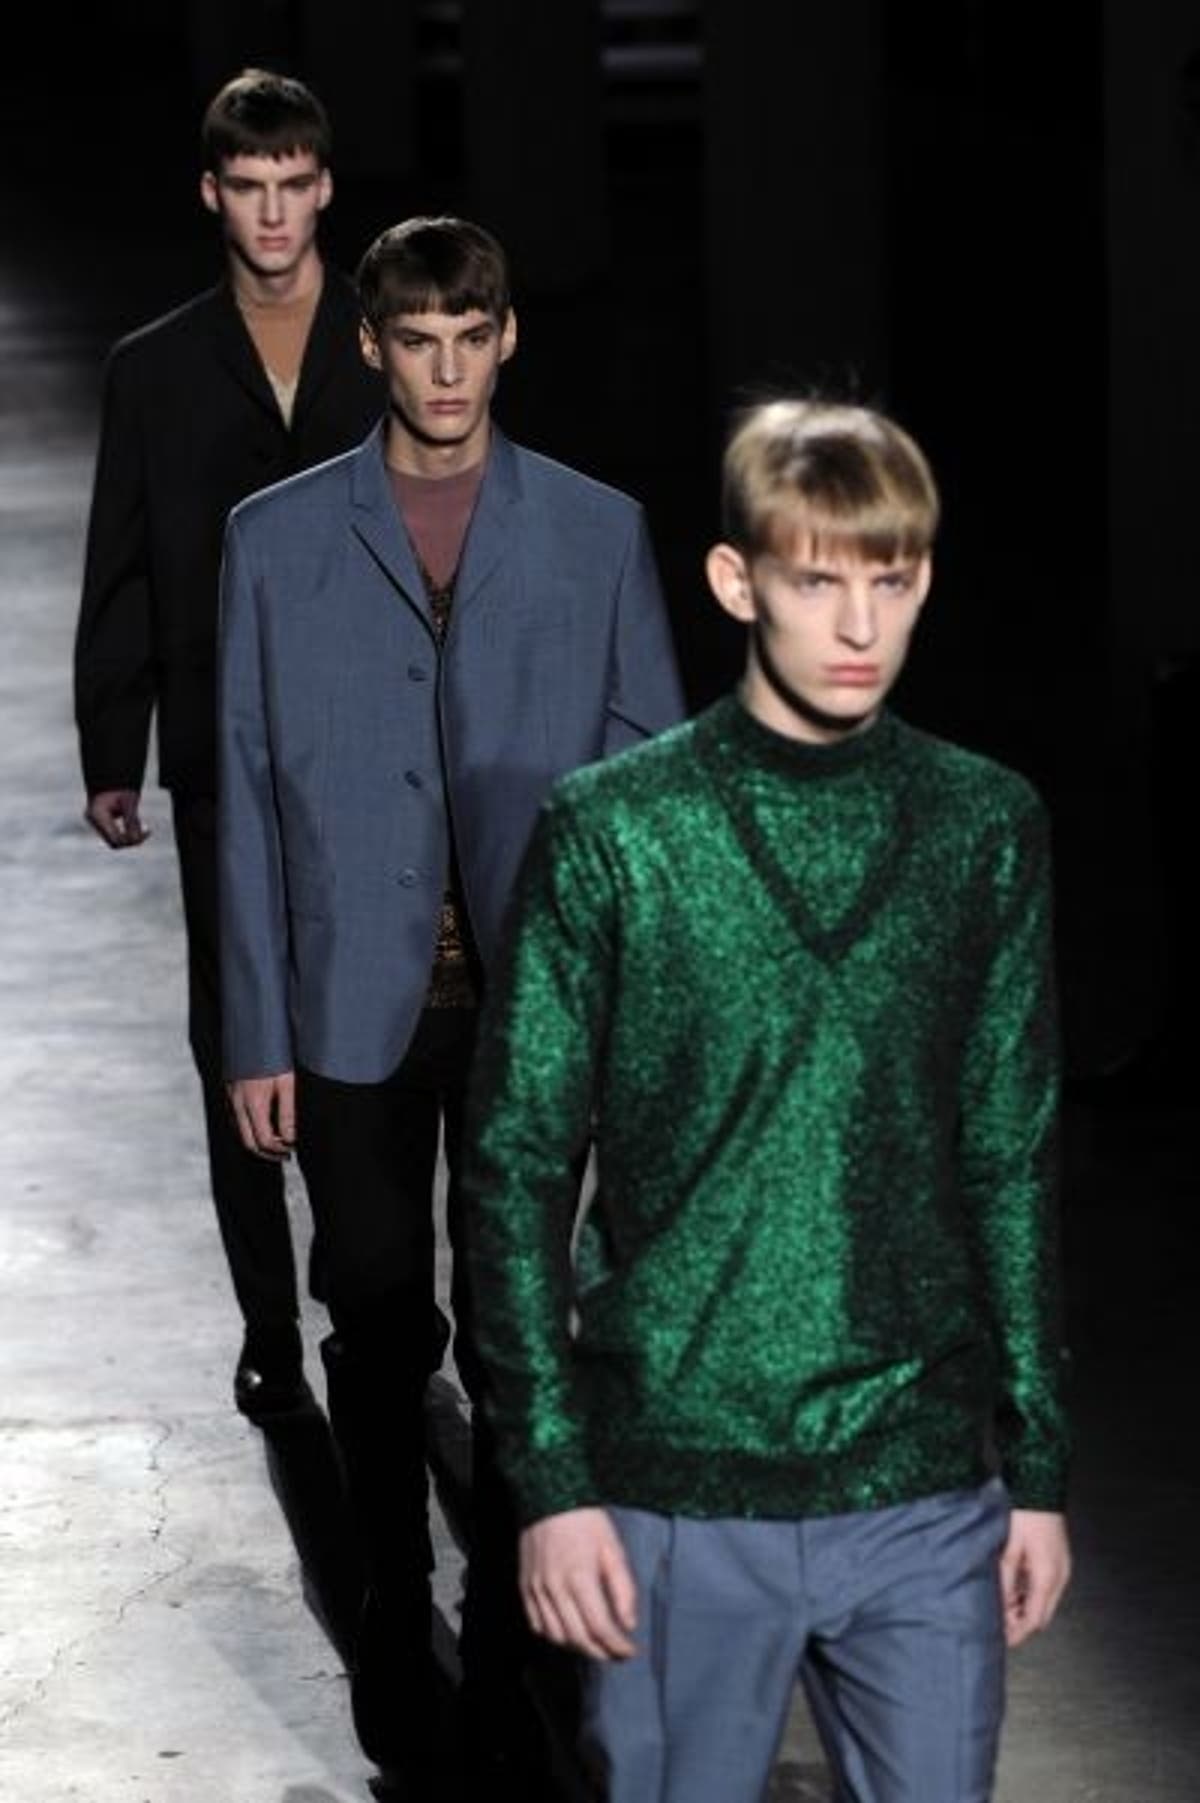 Fashion agenda: men's ready-to-wear | The Independent | The Independent